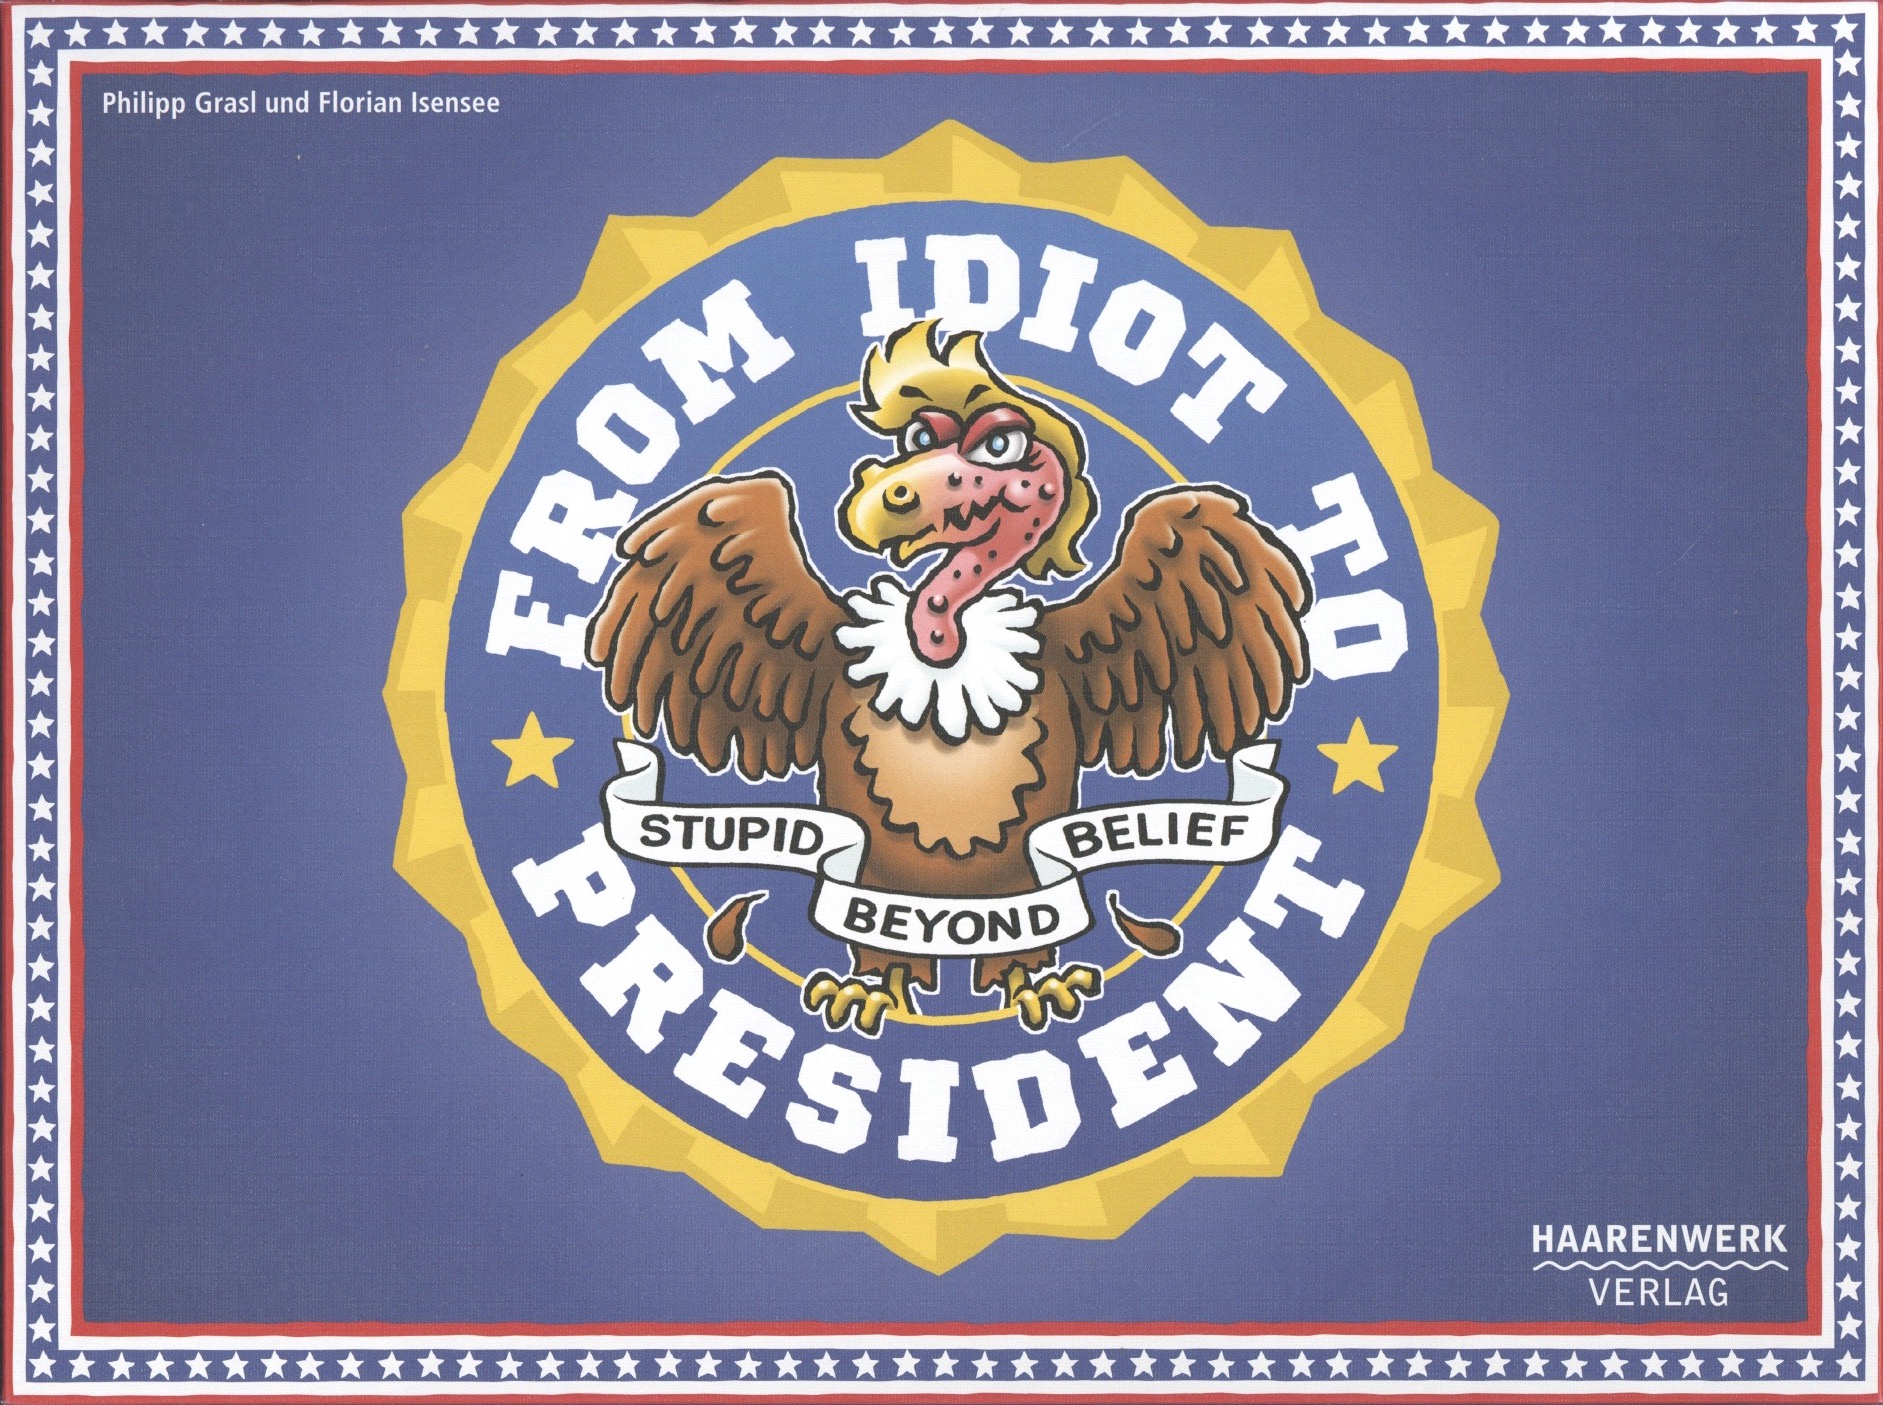 From Idiot to President